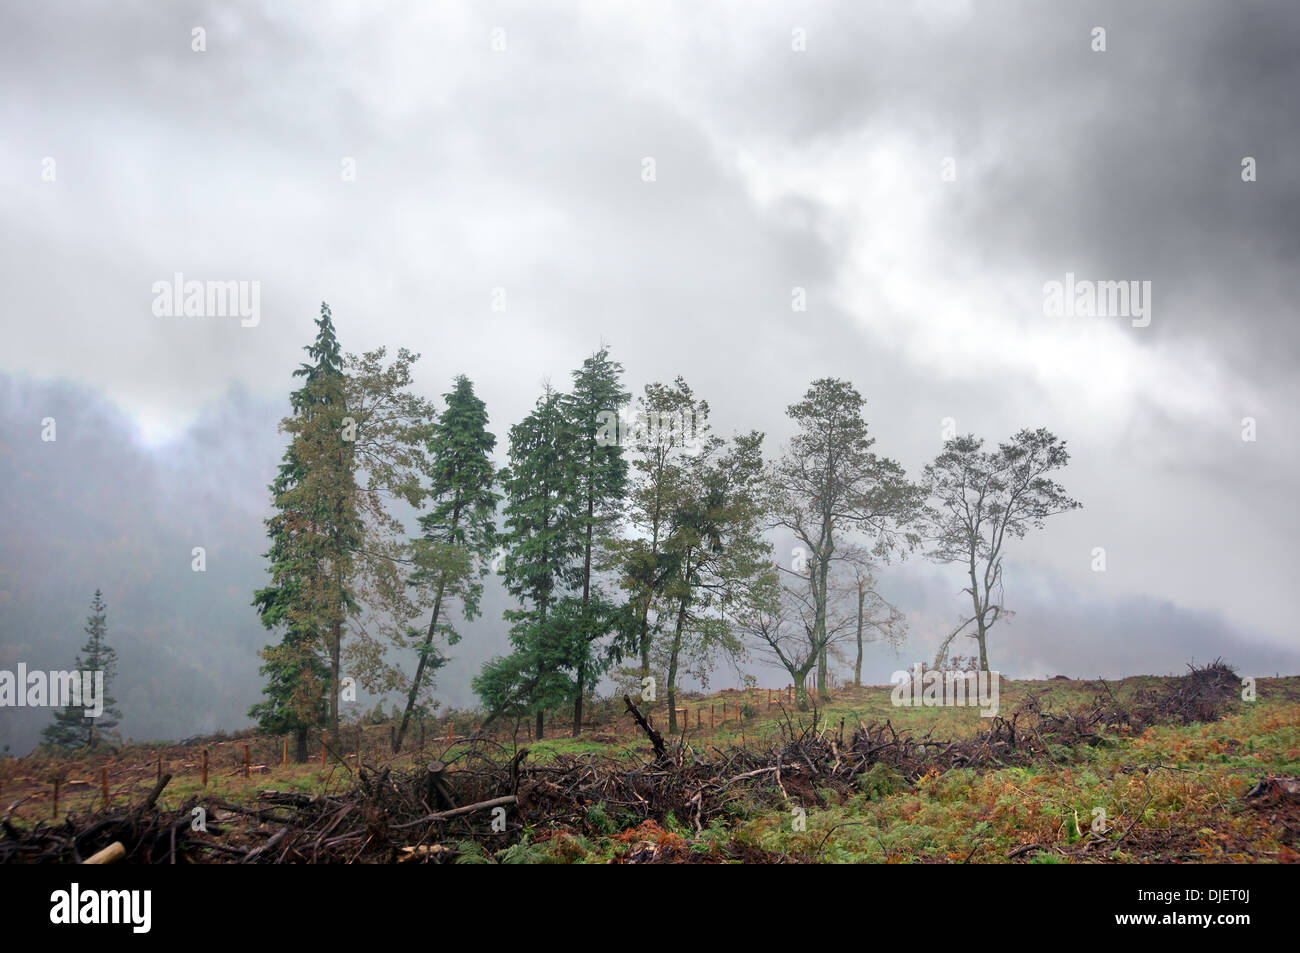 desolate landscape with trees and desforestation Stock Photo